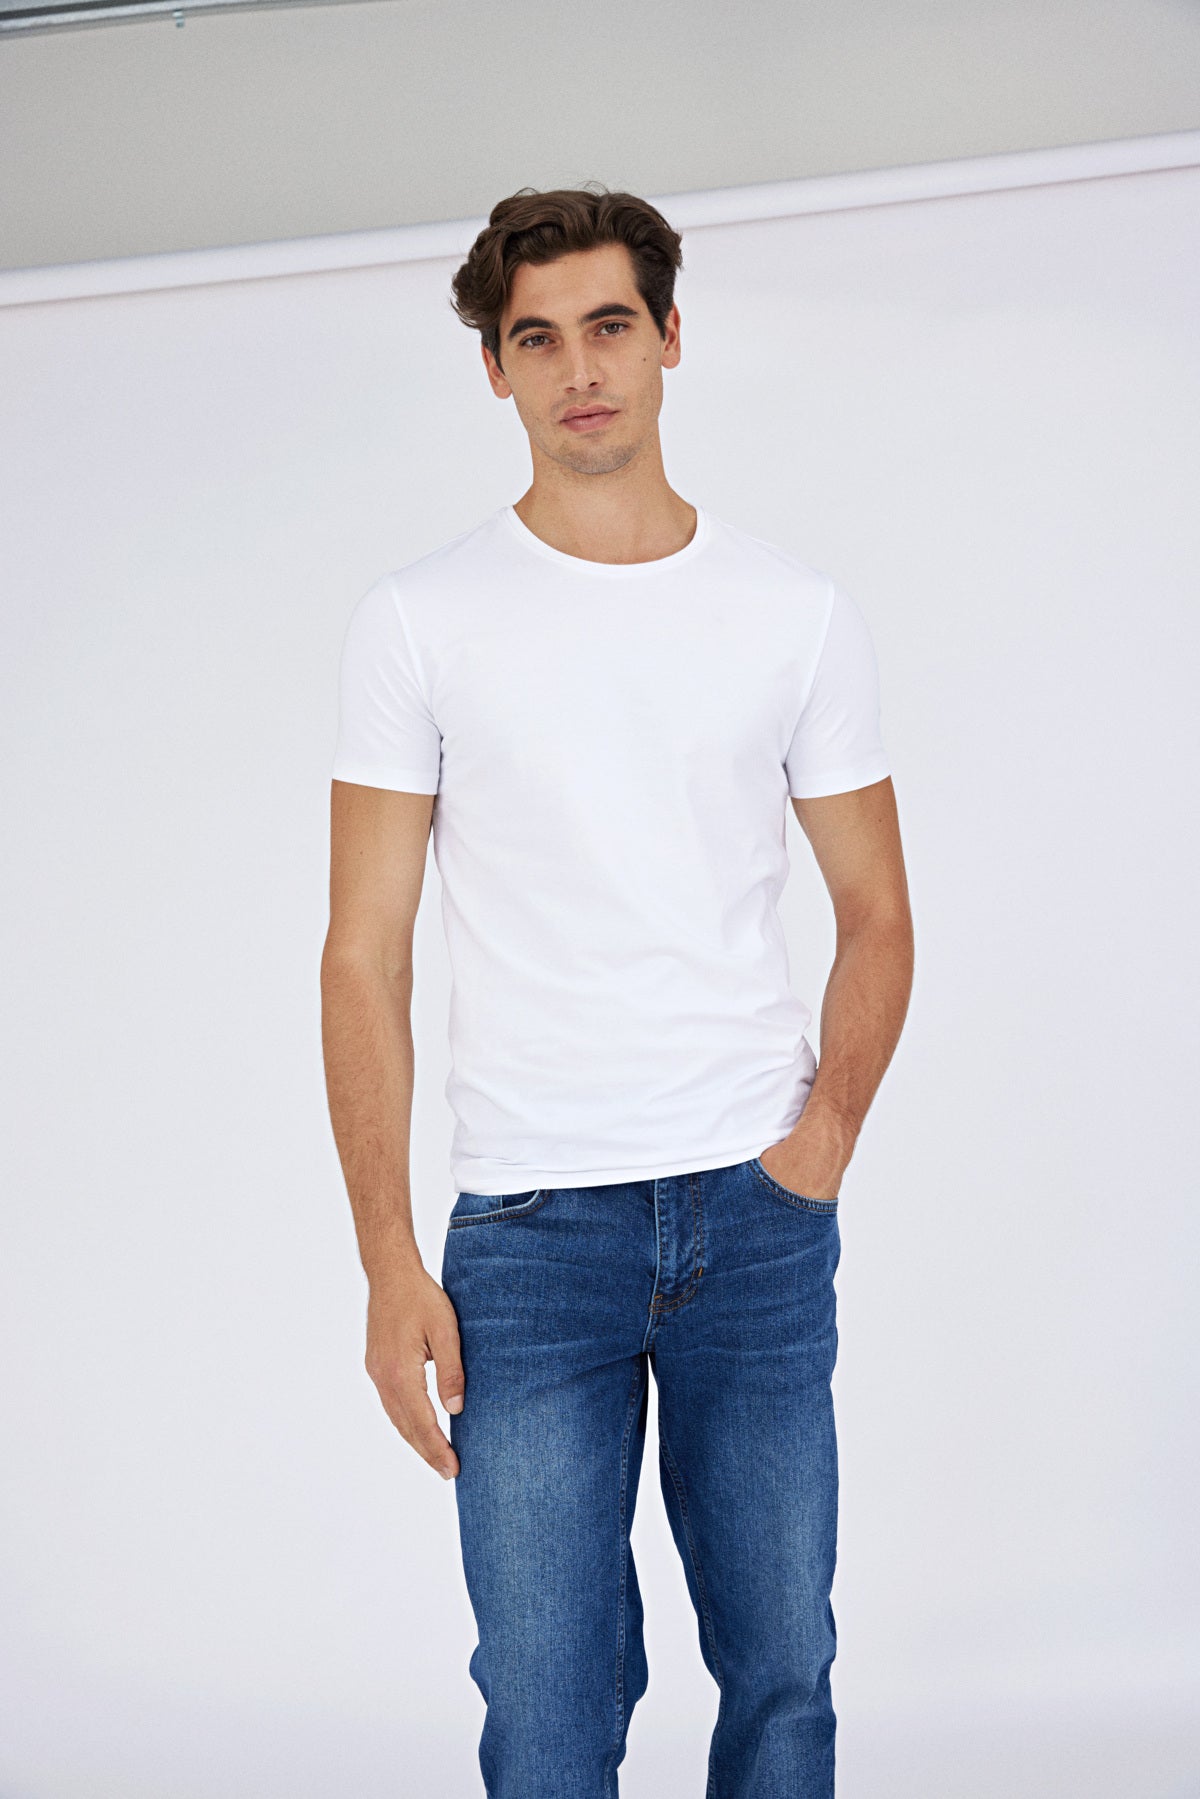 David Crew Neck T-shirt - Bright White - The Sons online